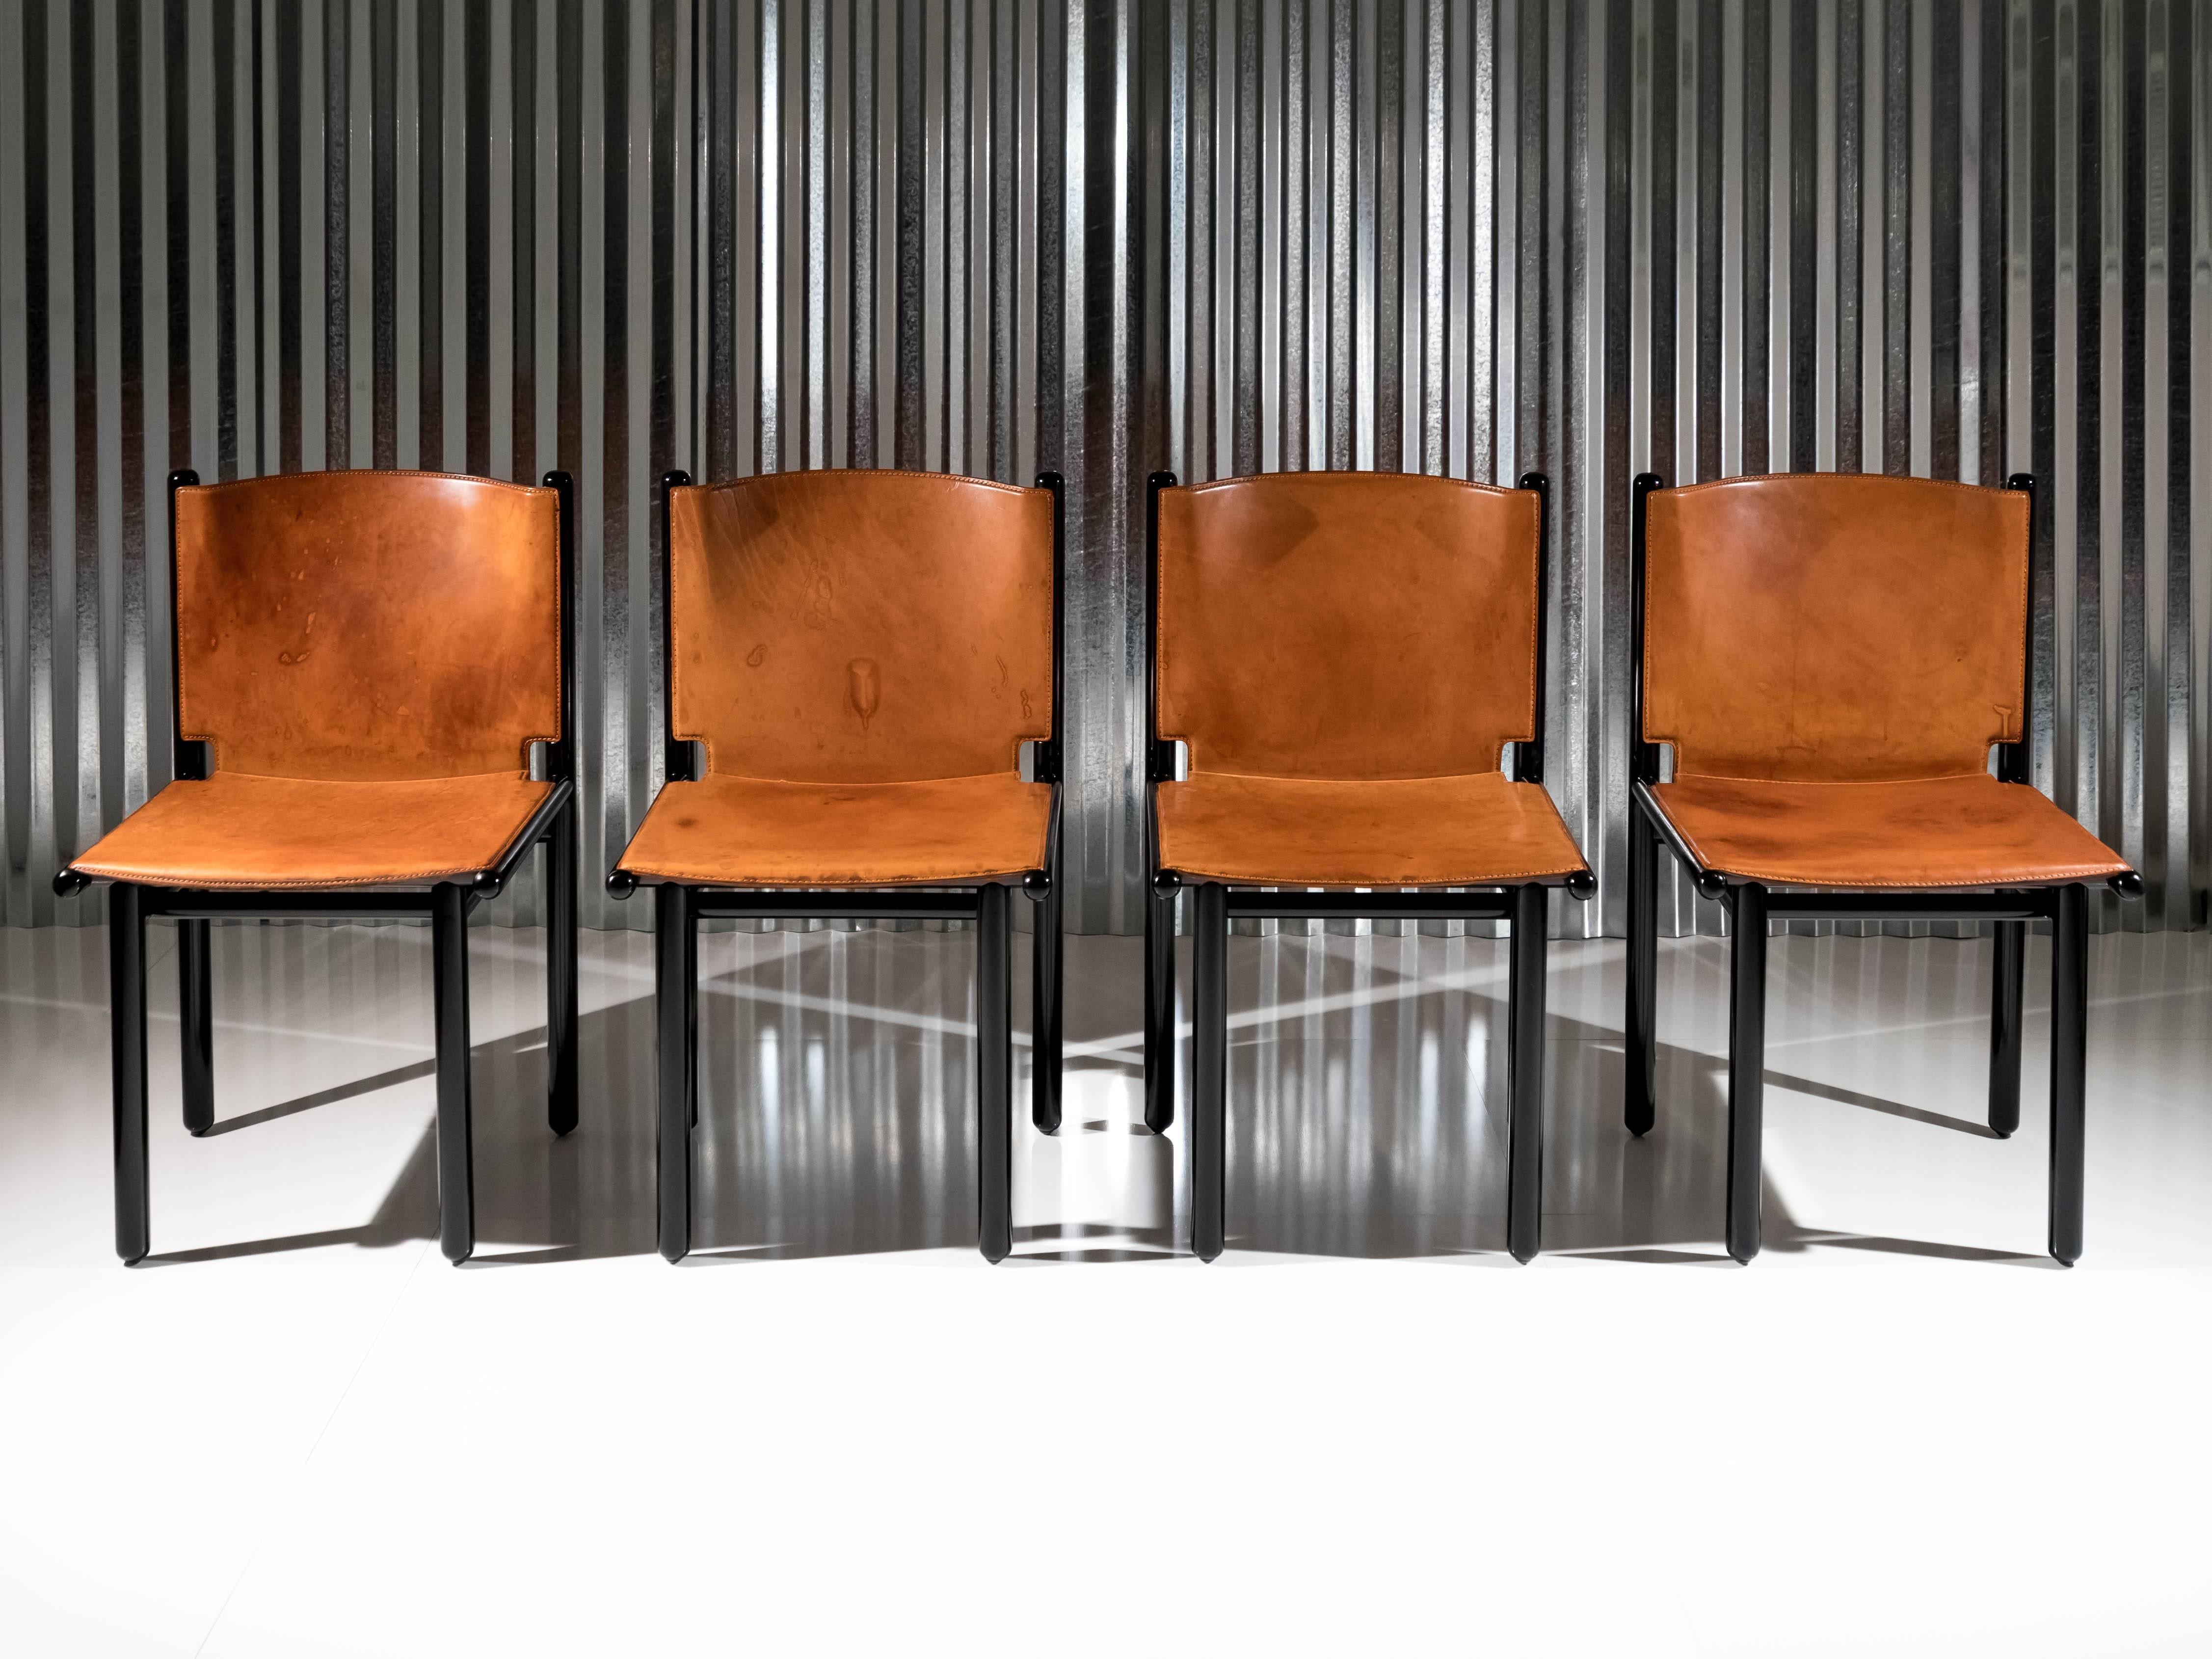 This set of four 'Caprile' chairs designed by Gianfranco Frattini for Cassina in 1985 display an elegant black lacquer finish that contrasts with the natural saddle leather molded seat and back. Designed by Frattini after spending the previous year